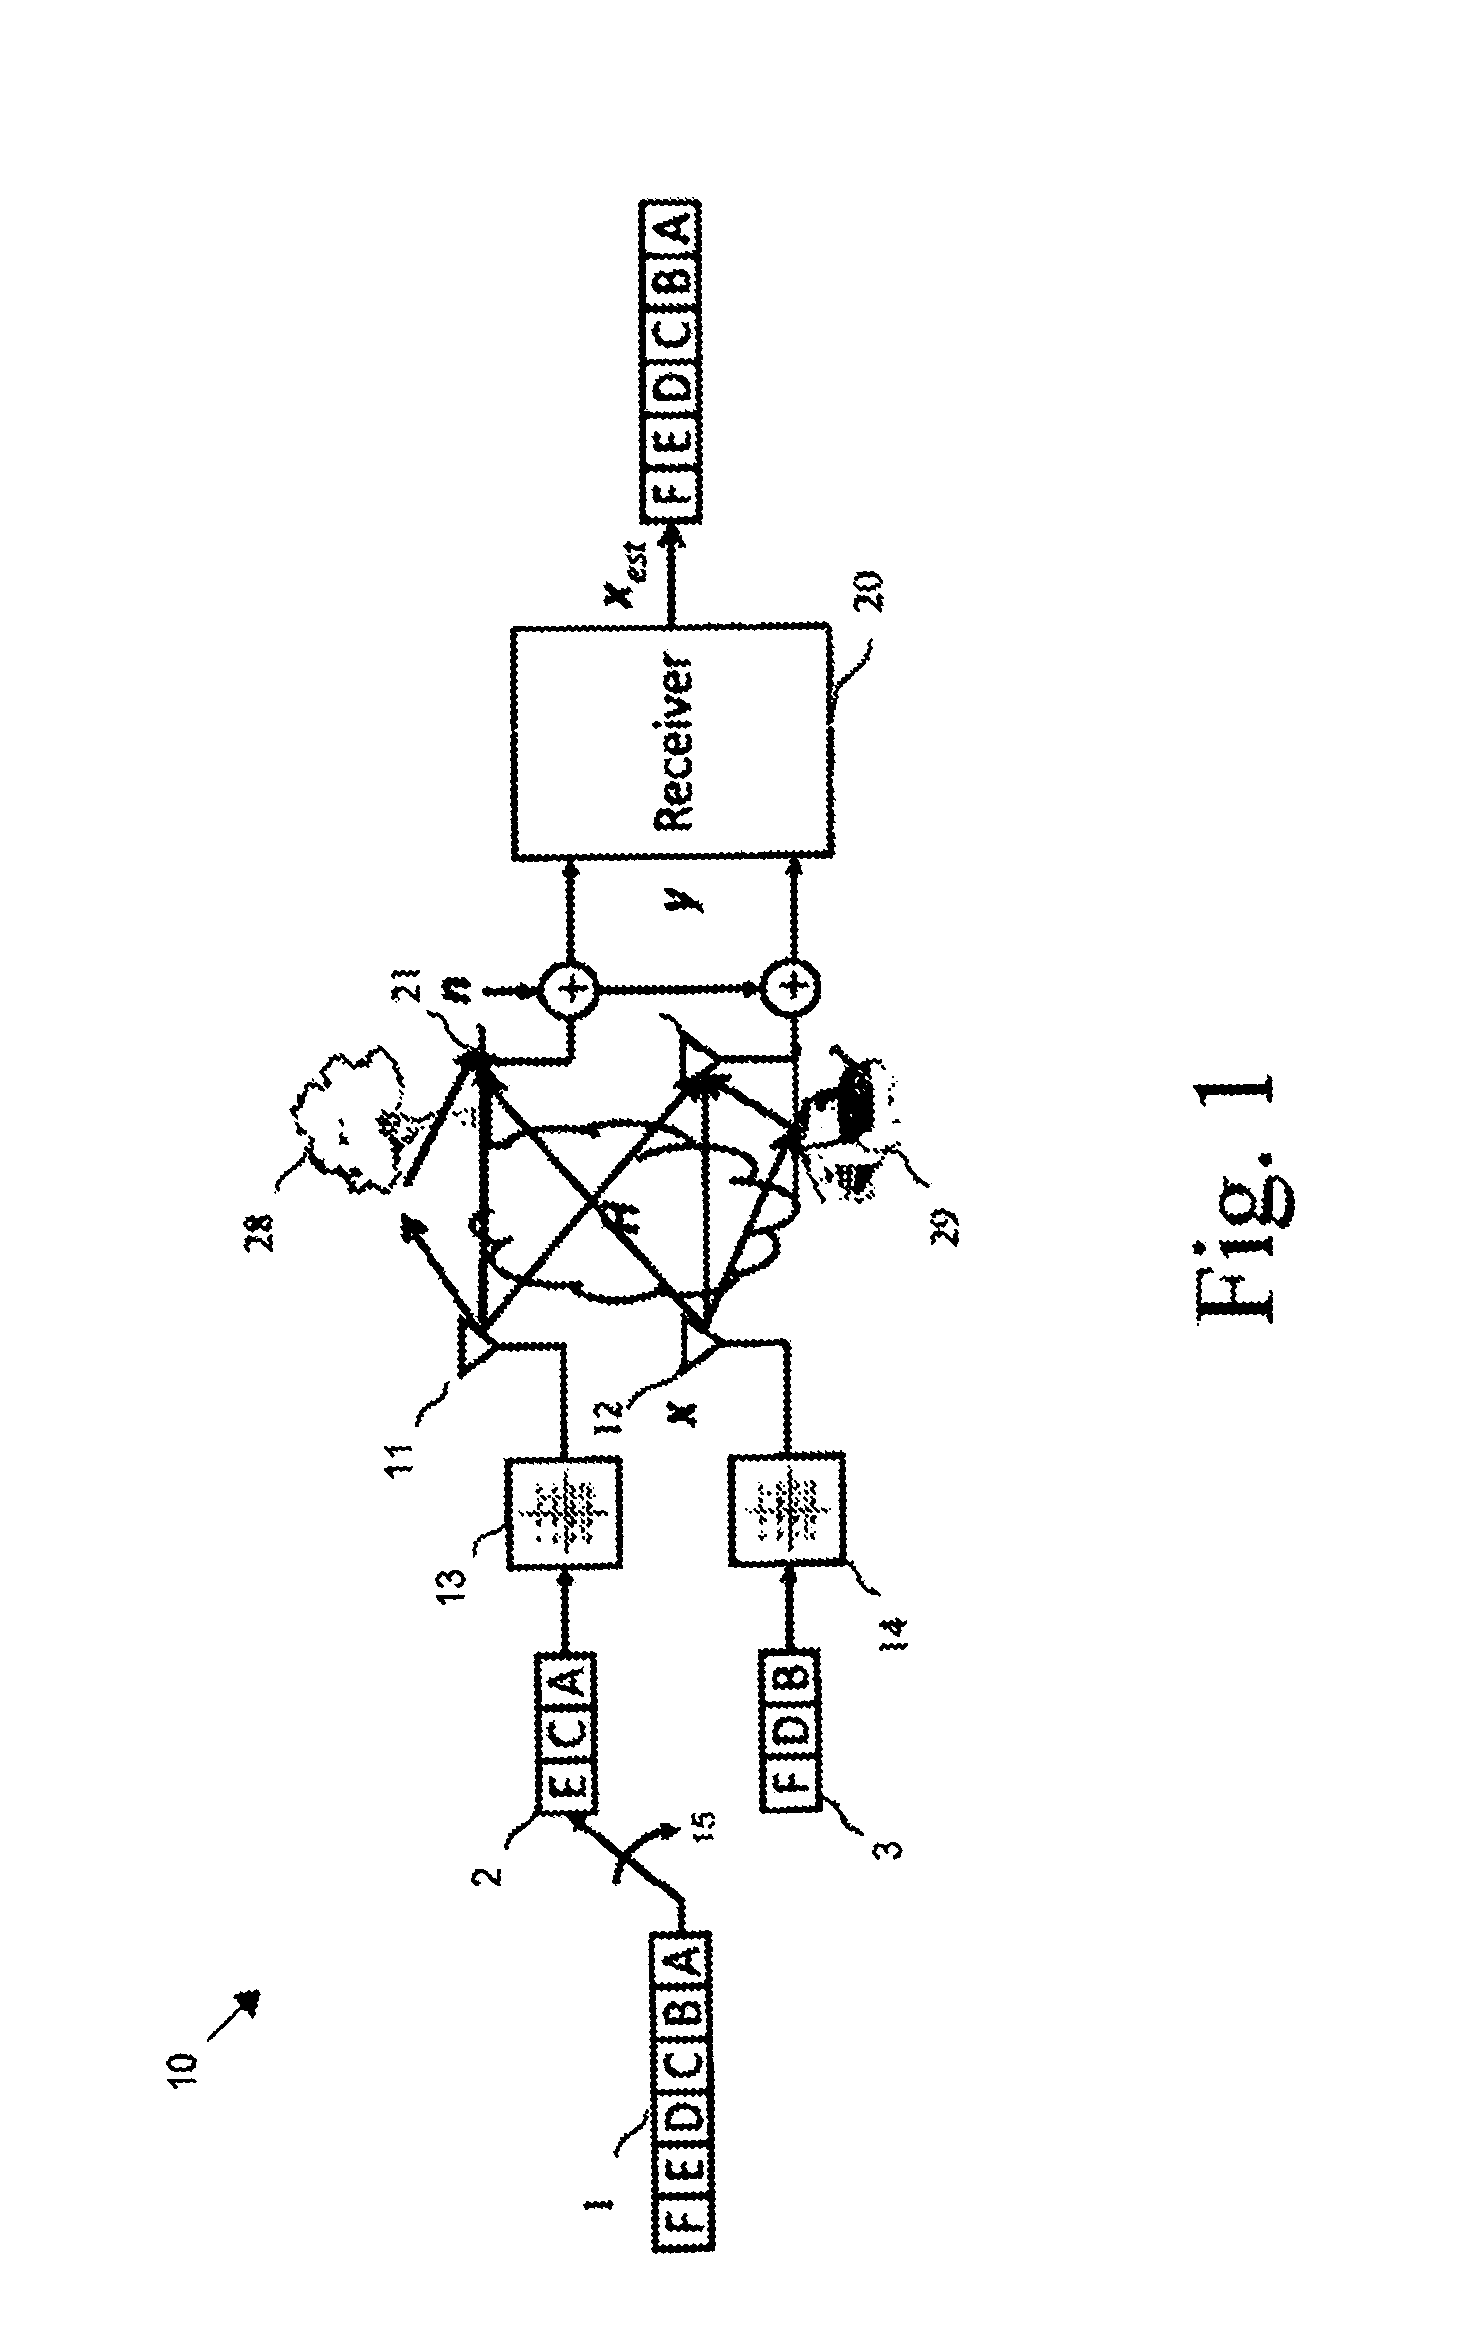 Detection process for a receiver of a wireless MIMO communication system